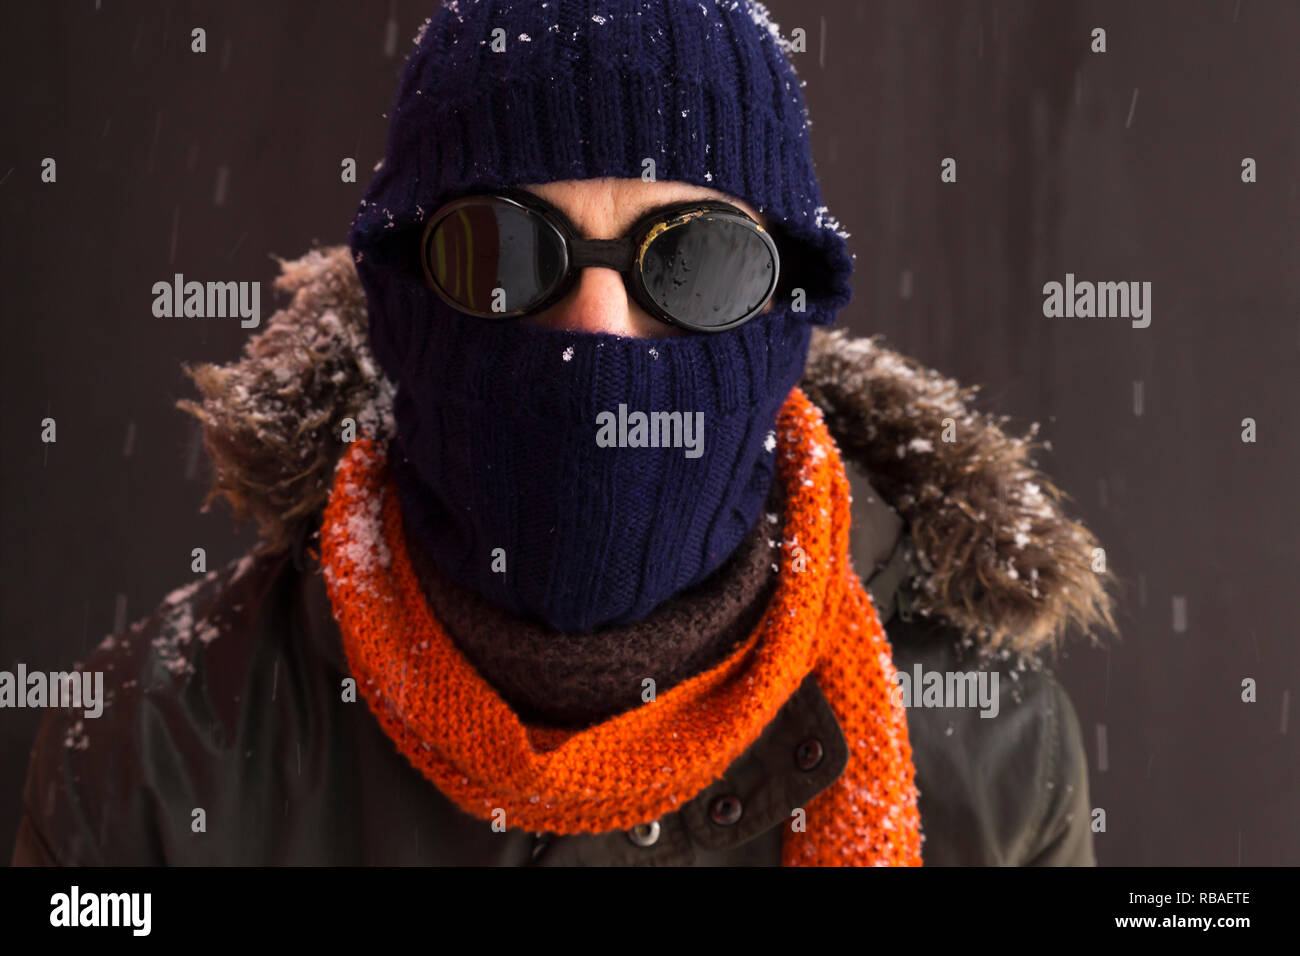 Portrait of a single male winter adventurer wearing a warm green coat with fur hood, a blue ski cap, an orange scarf and black retro style goggles Stock Photo